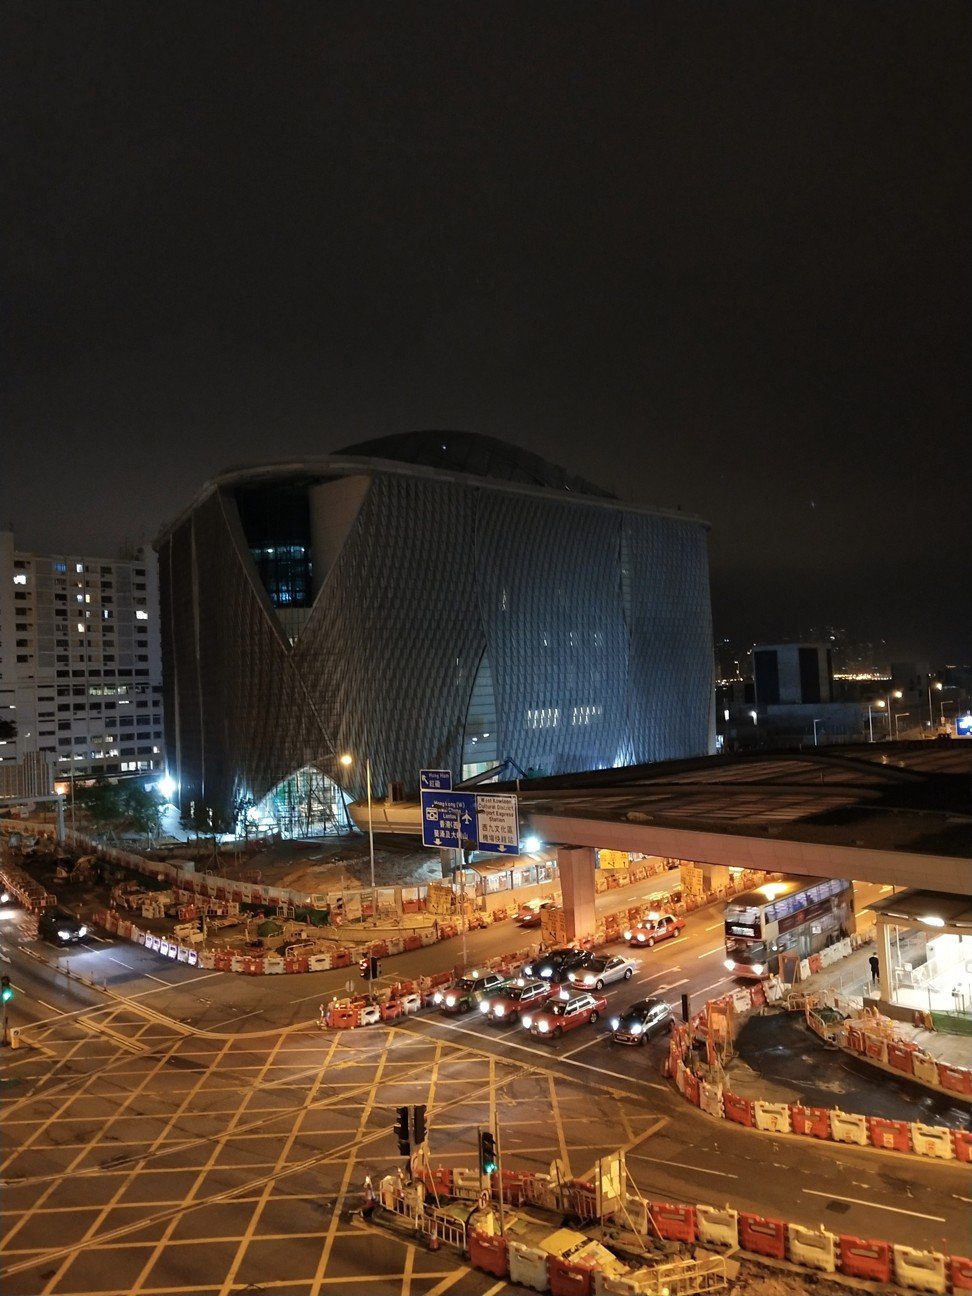 A lowlight photo looking towards the Xiqu Centre for Chinese opera in Hong Kong’s West Kowloon Cultural District, taken using the Vivo X21’s 12-megapixel dual camera with f/1.8 lens.